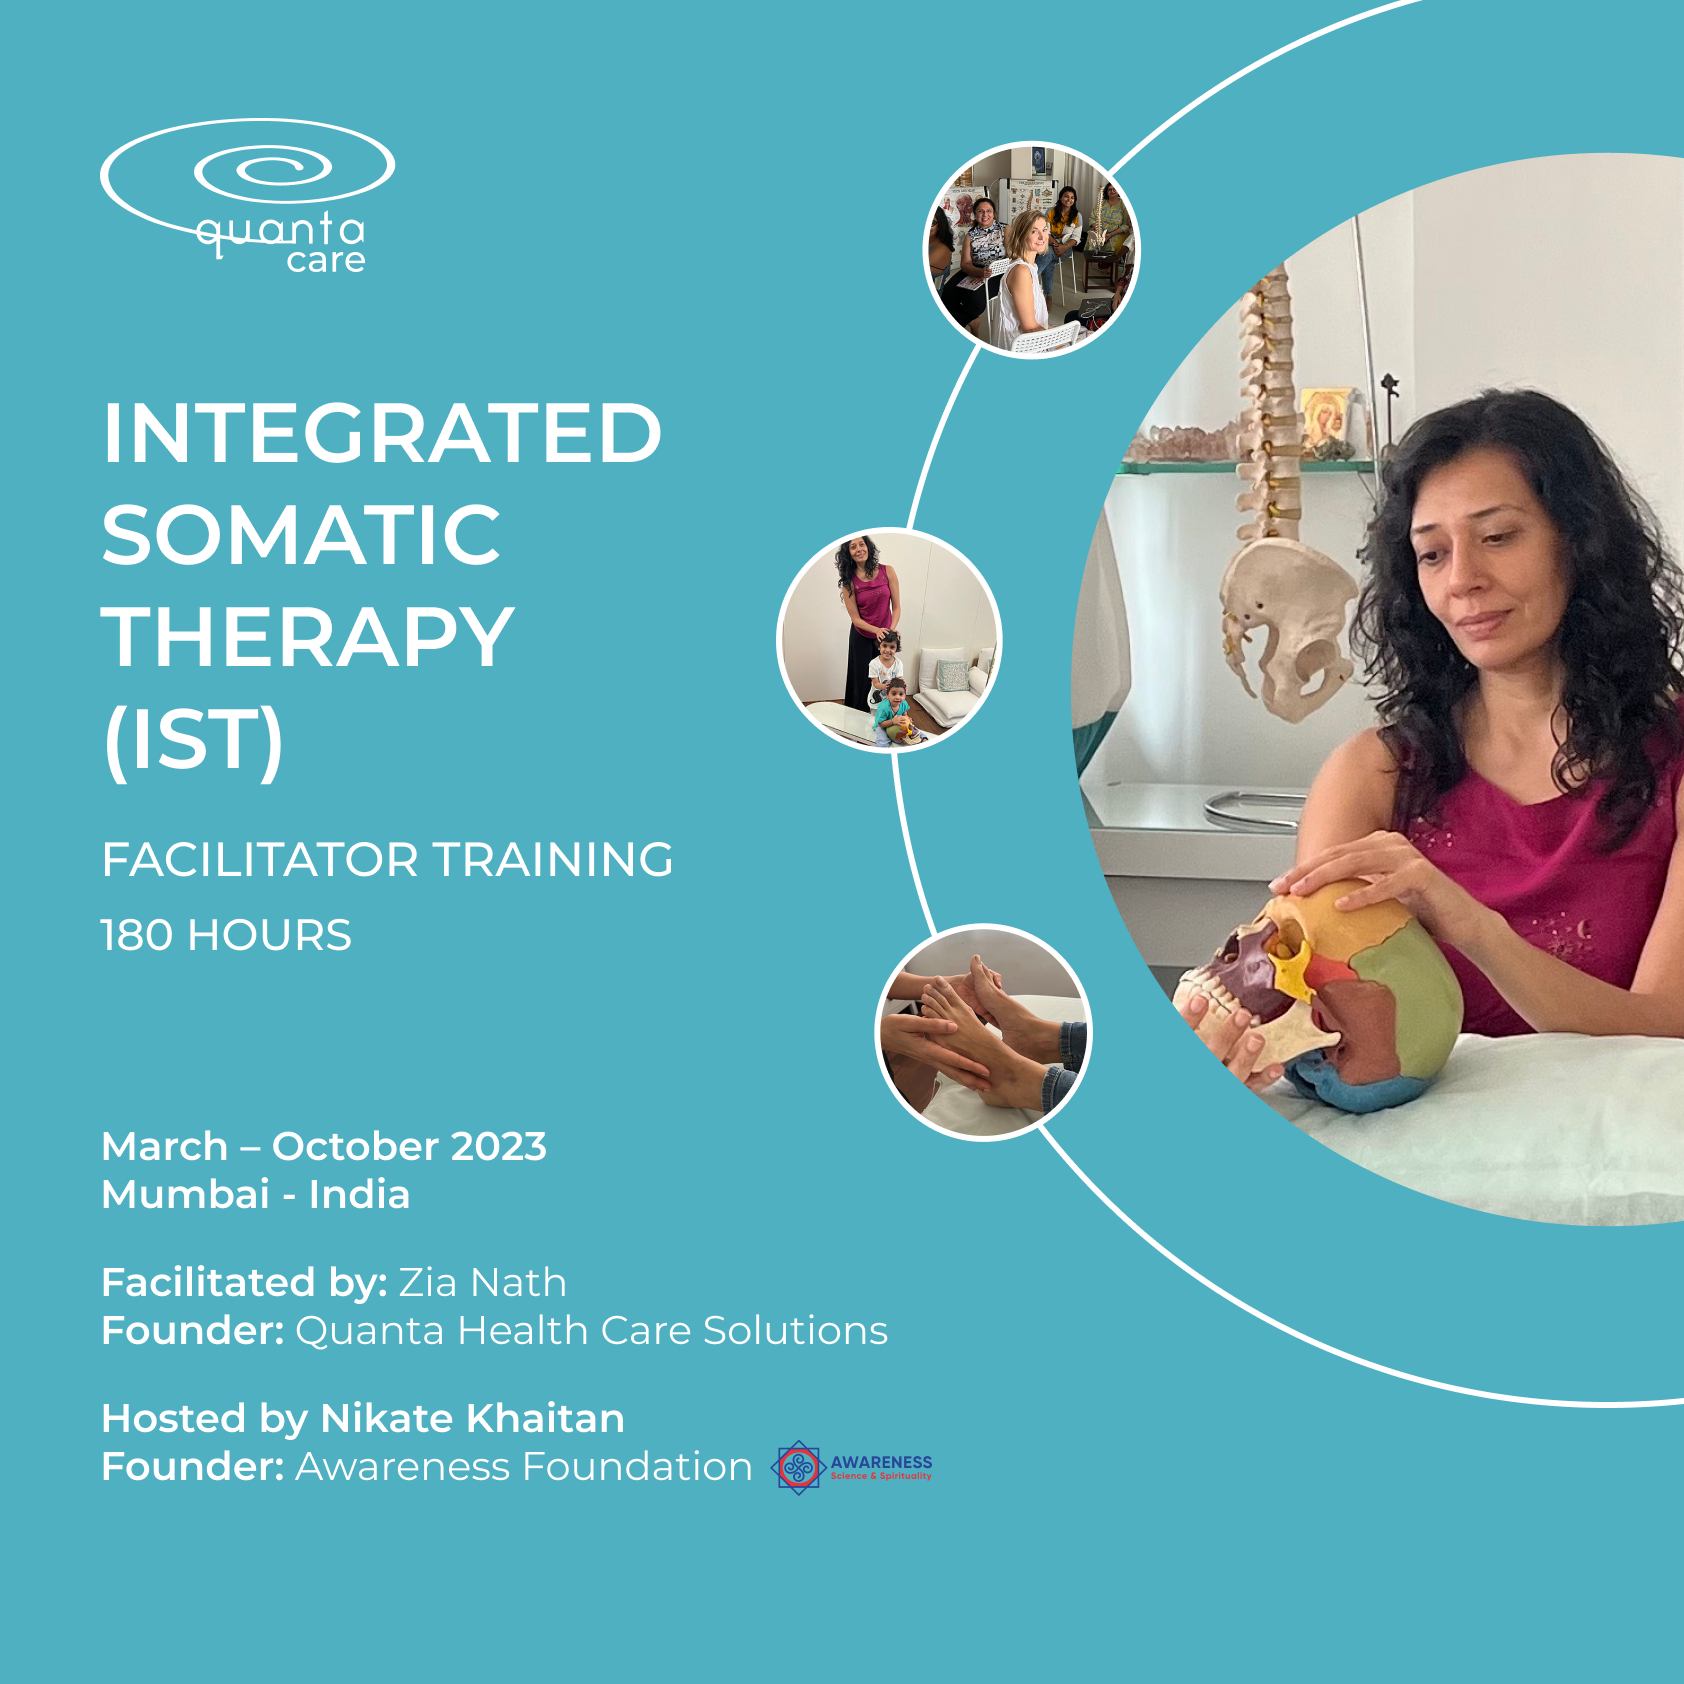 INTEGRATED SOMATIC THERAPY (IST)